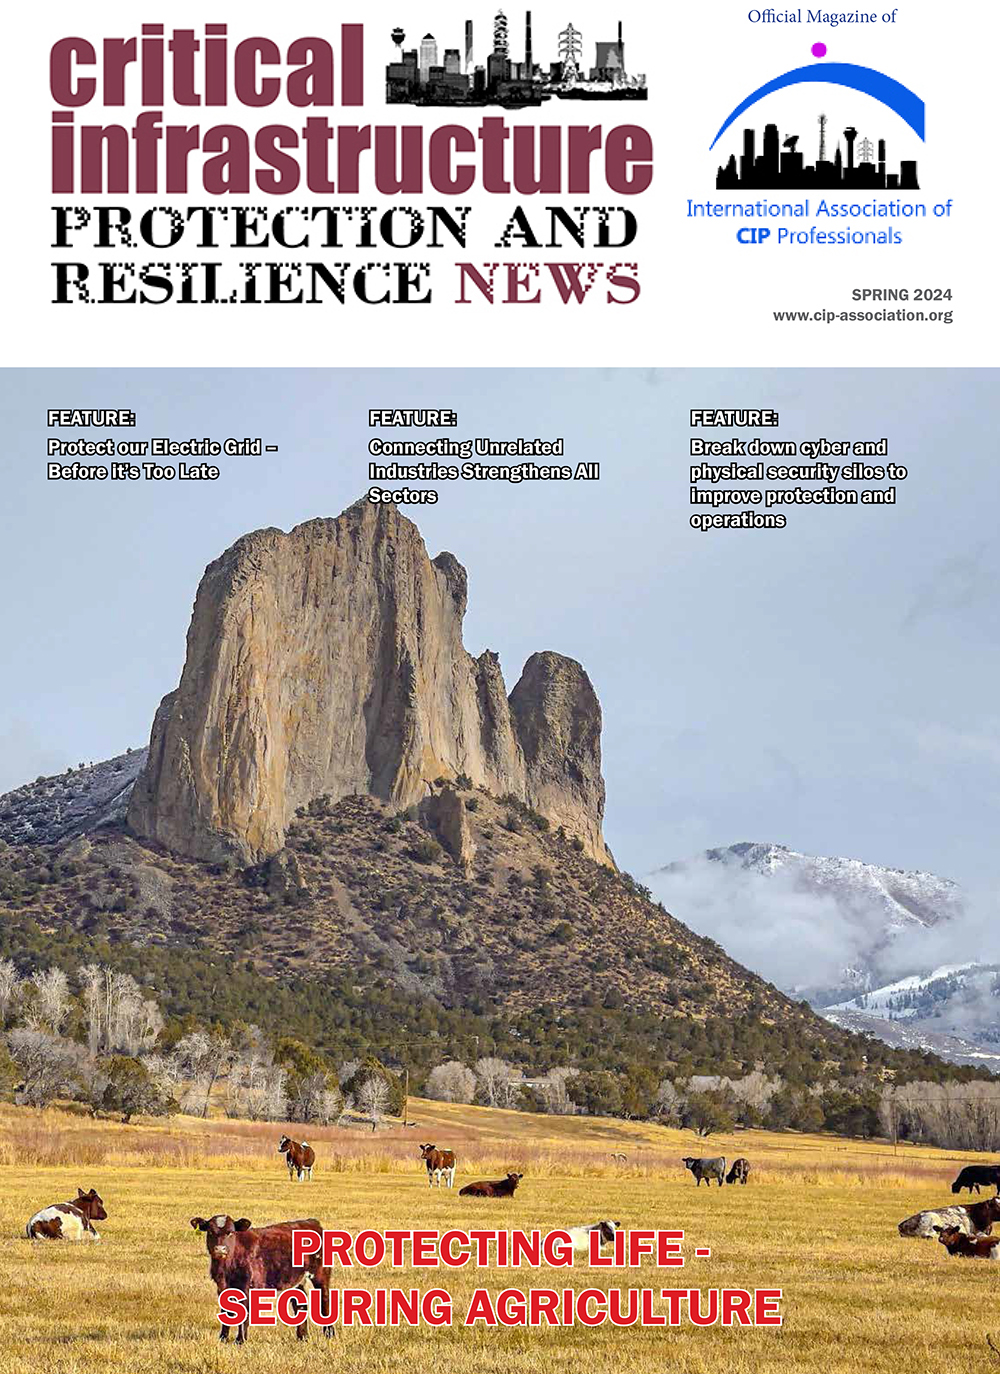 Your latest issue of Critical Infrastructure Protection & Resilience News has arrived